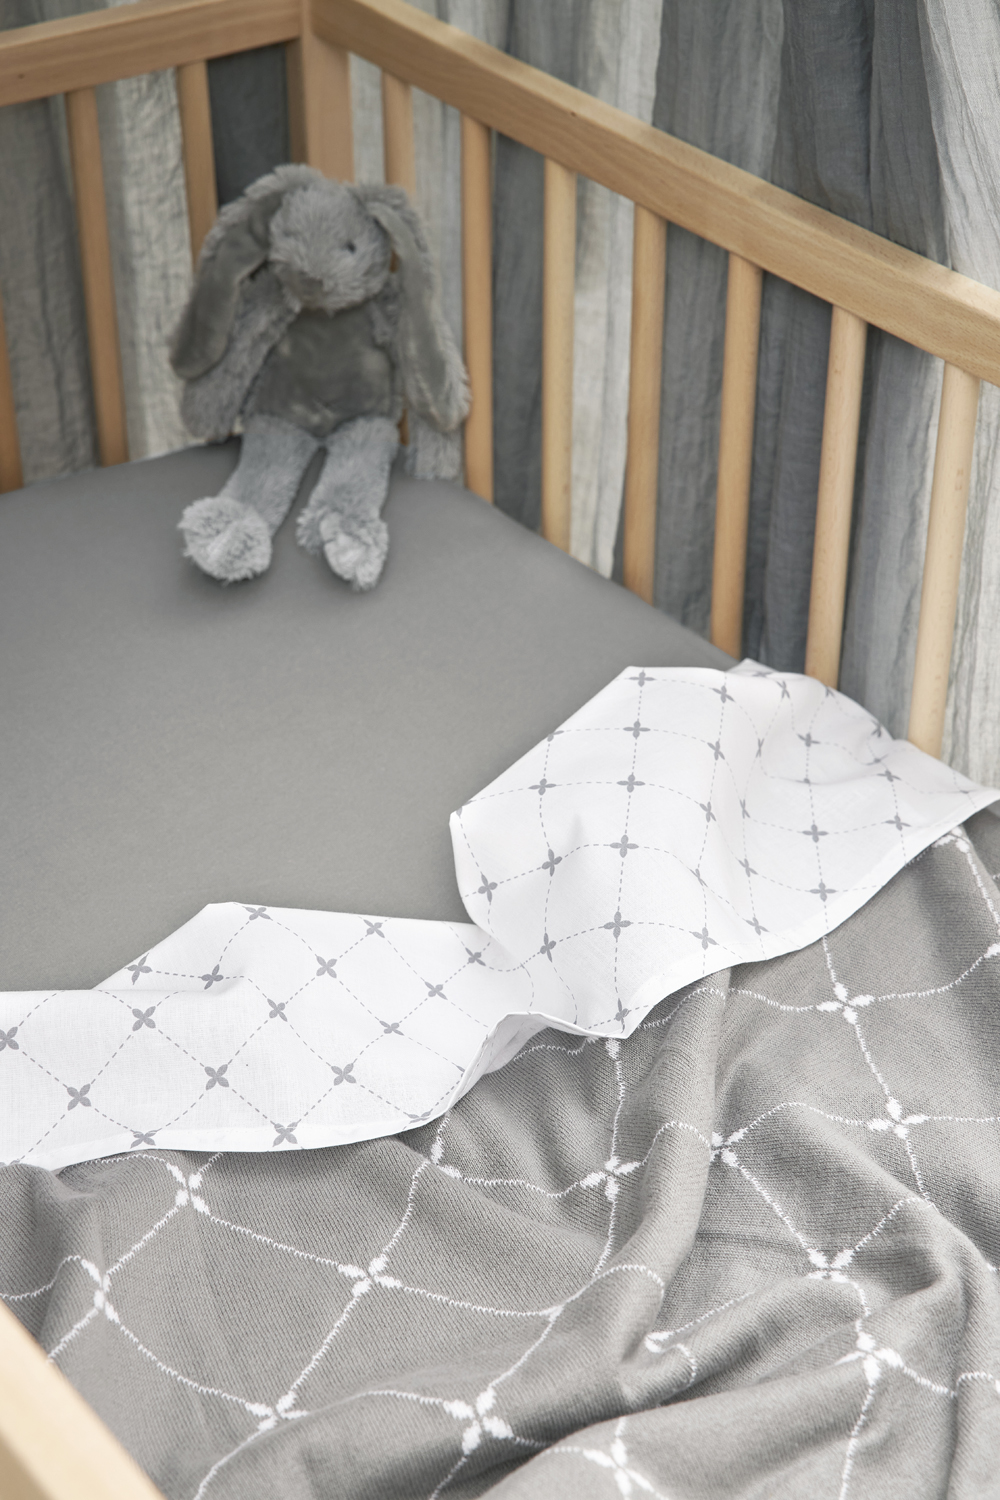 Crib bed blanket + 2-pack crib sheets + fitted sheet crib Louis - grey - 75x100cm